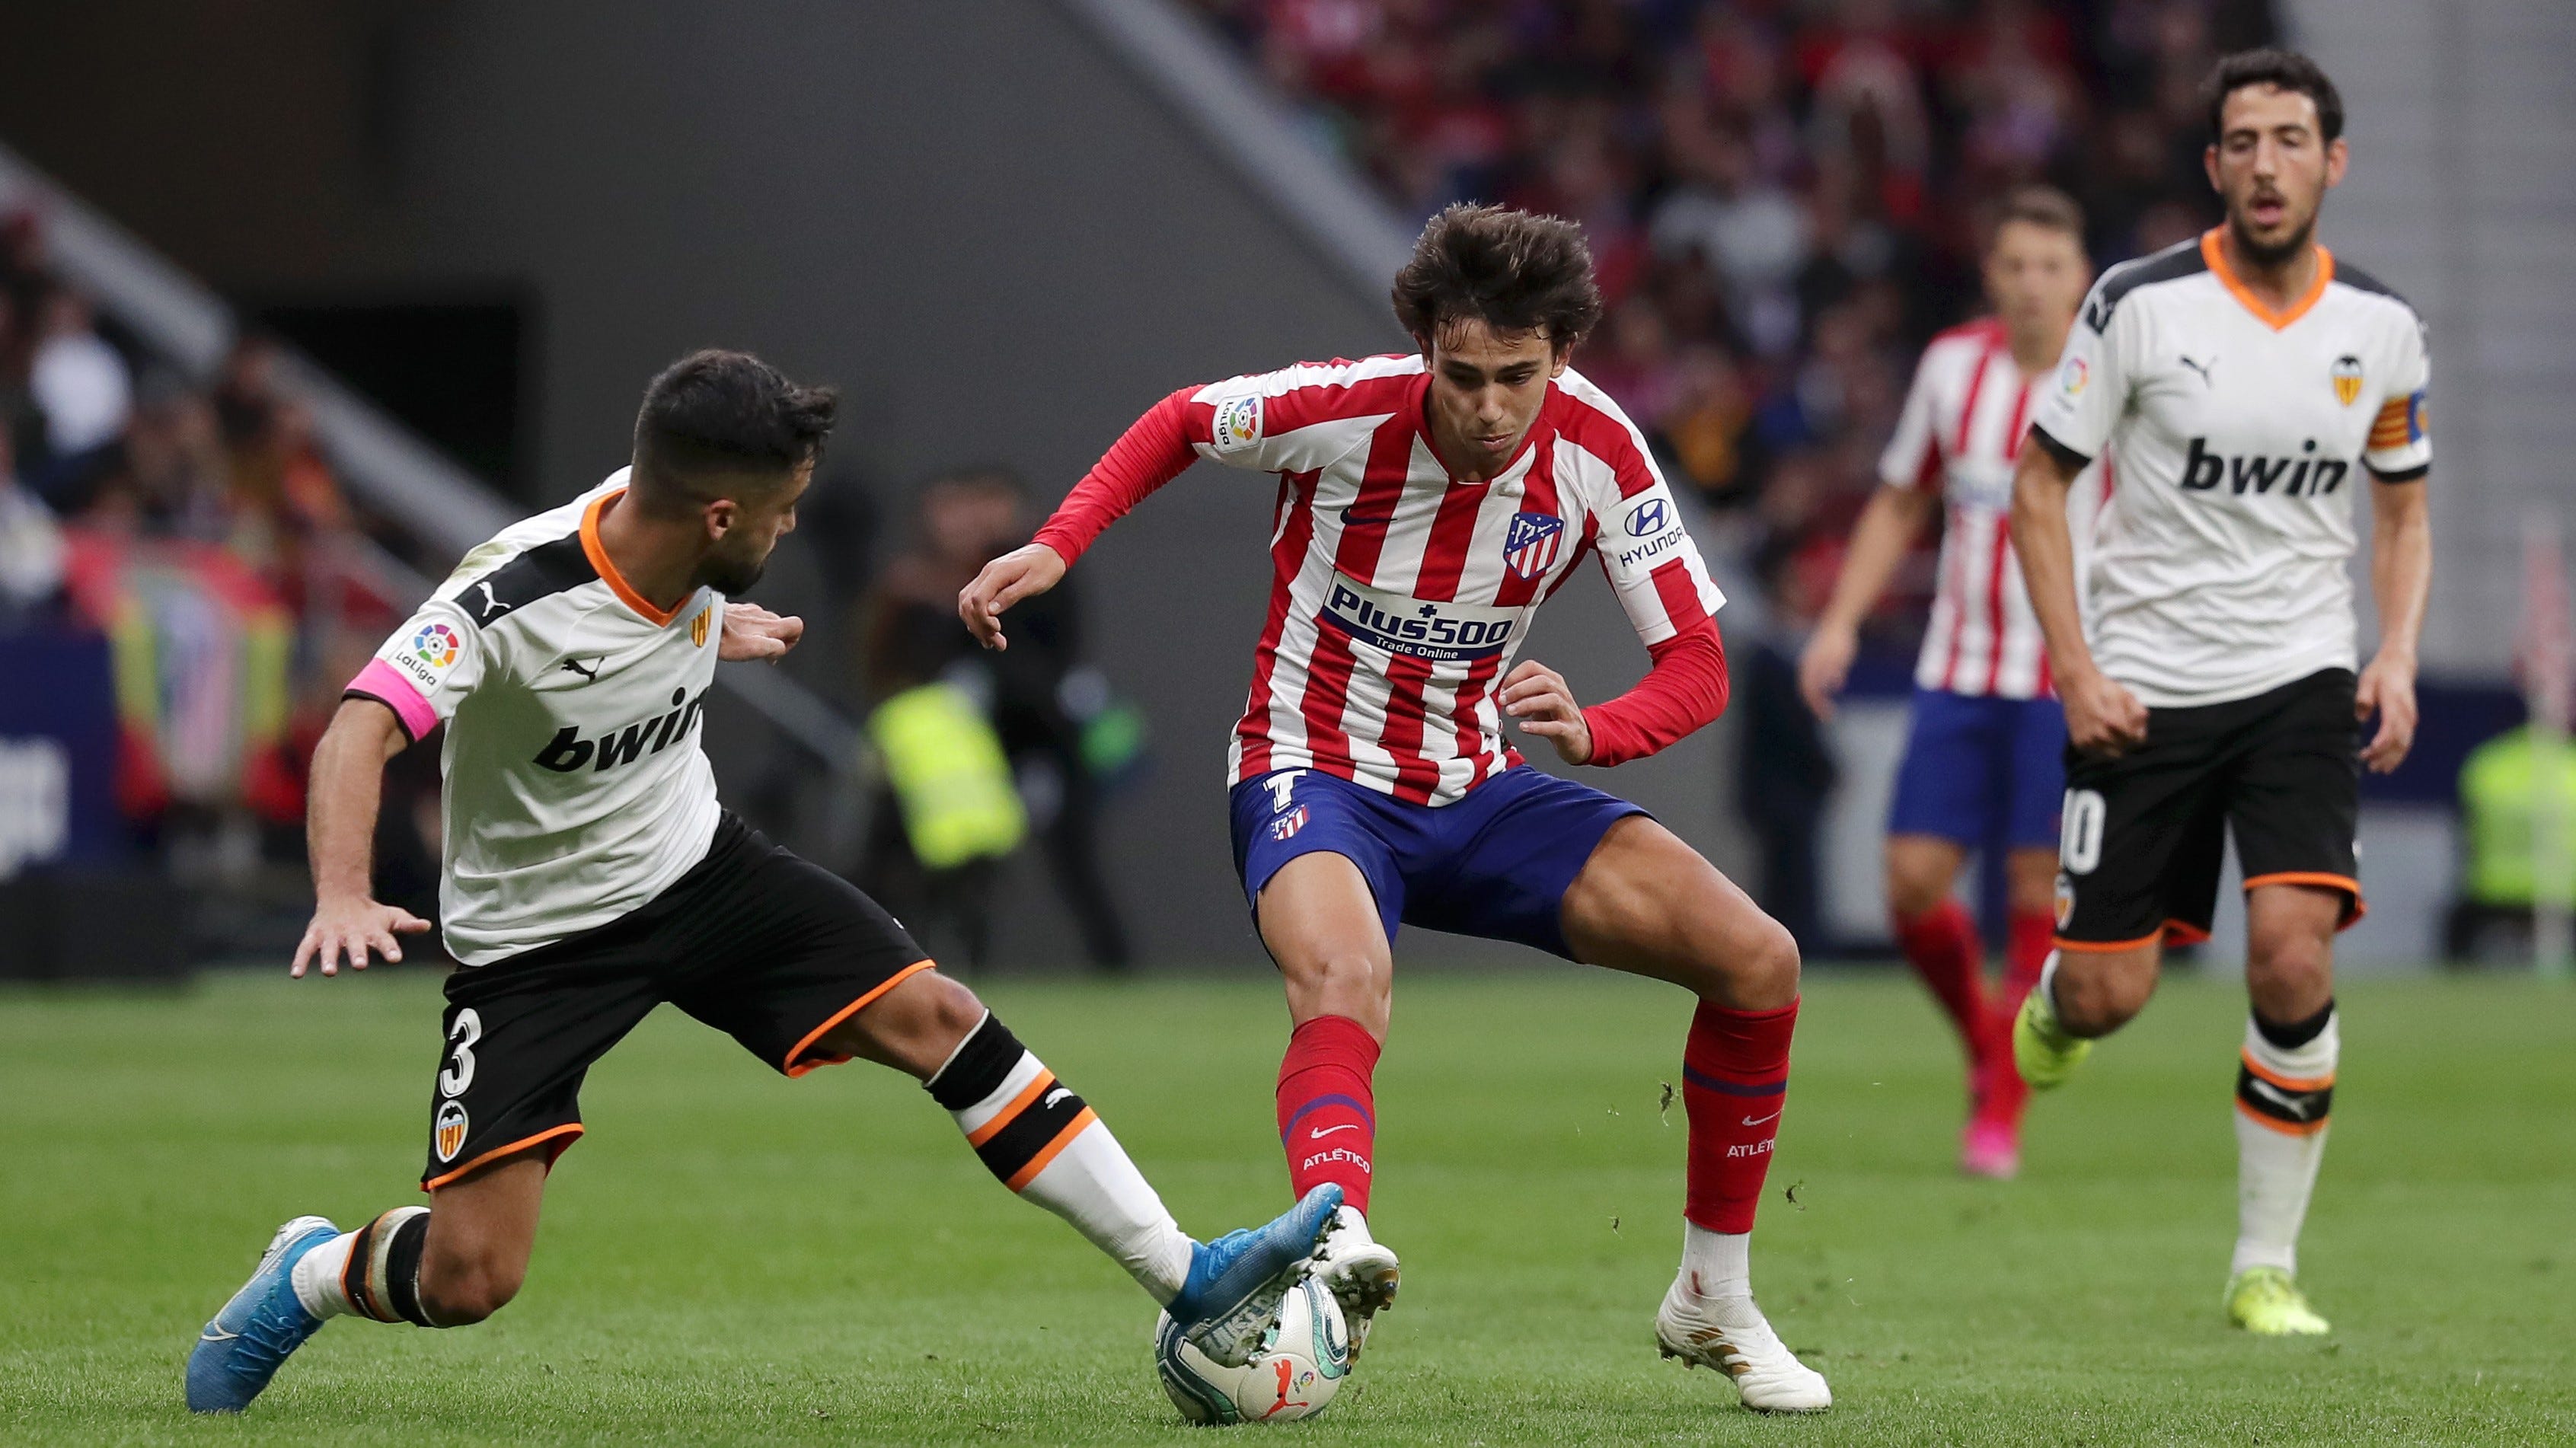 ValenciaVs Atlético Madrid Tips and H2H Stats